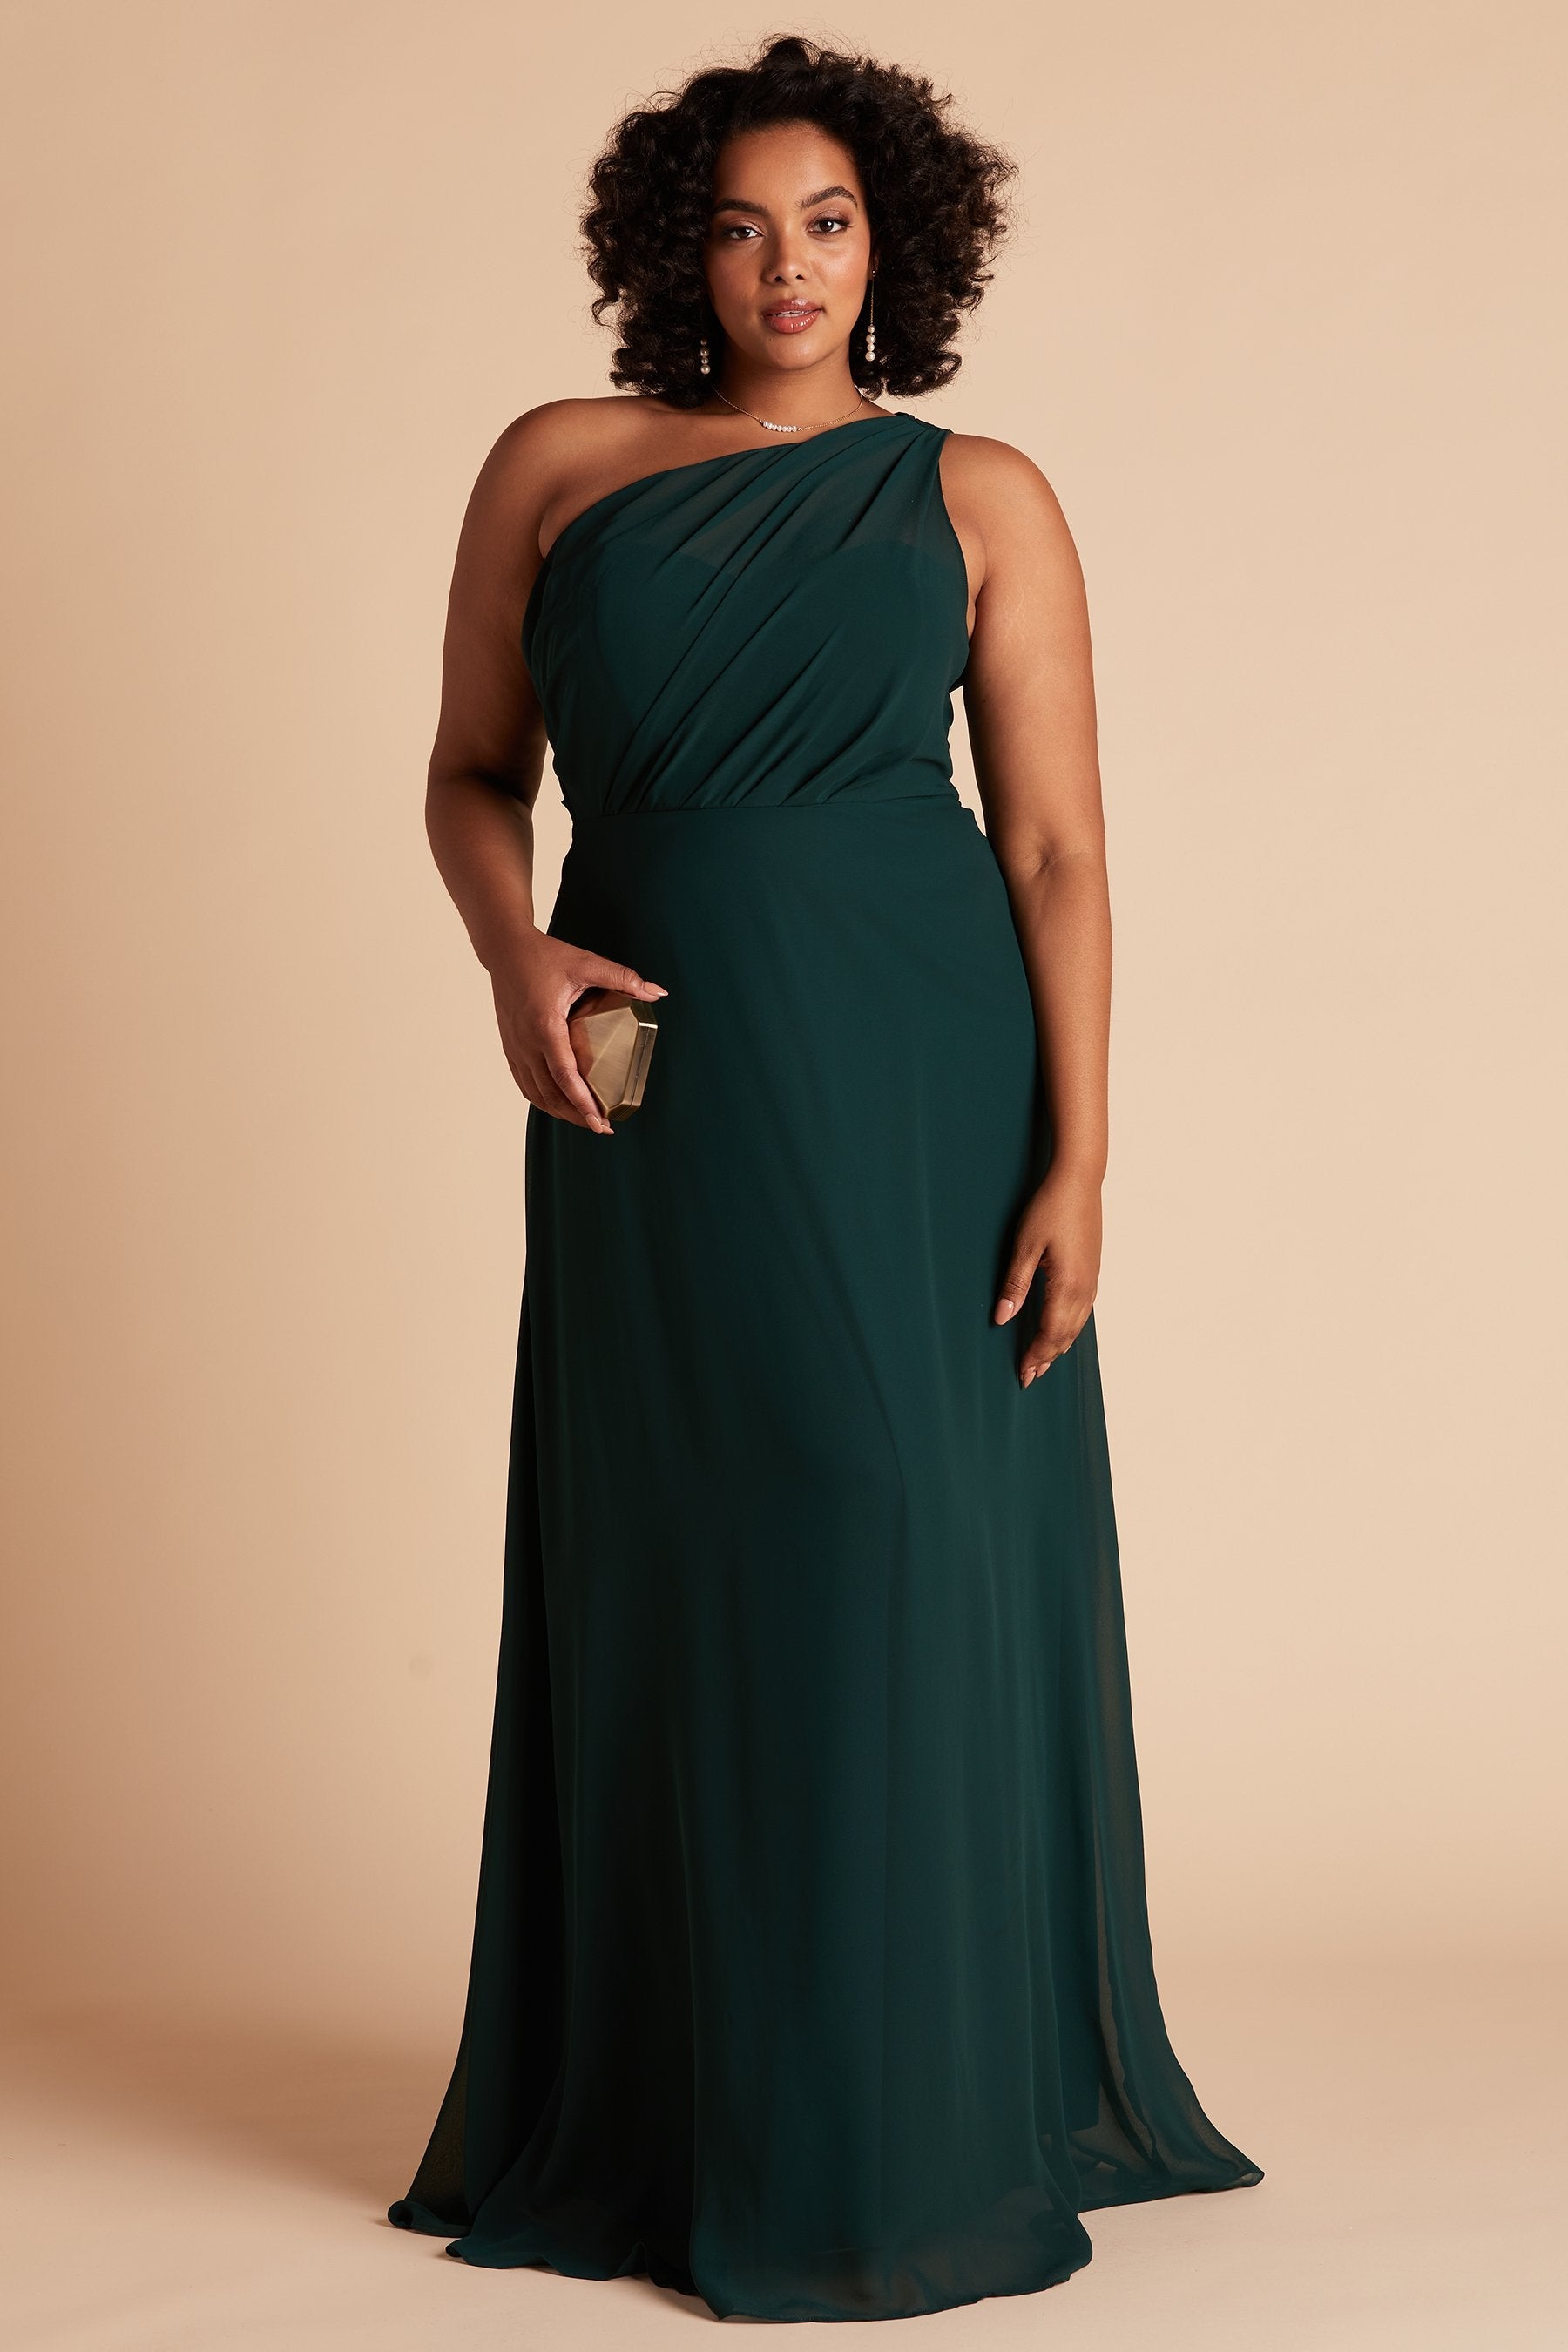 Kira plus size bridesmaid dress in emerald chiffon by Birdy Grey, front view